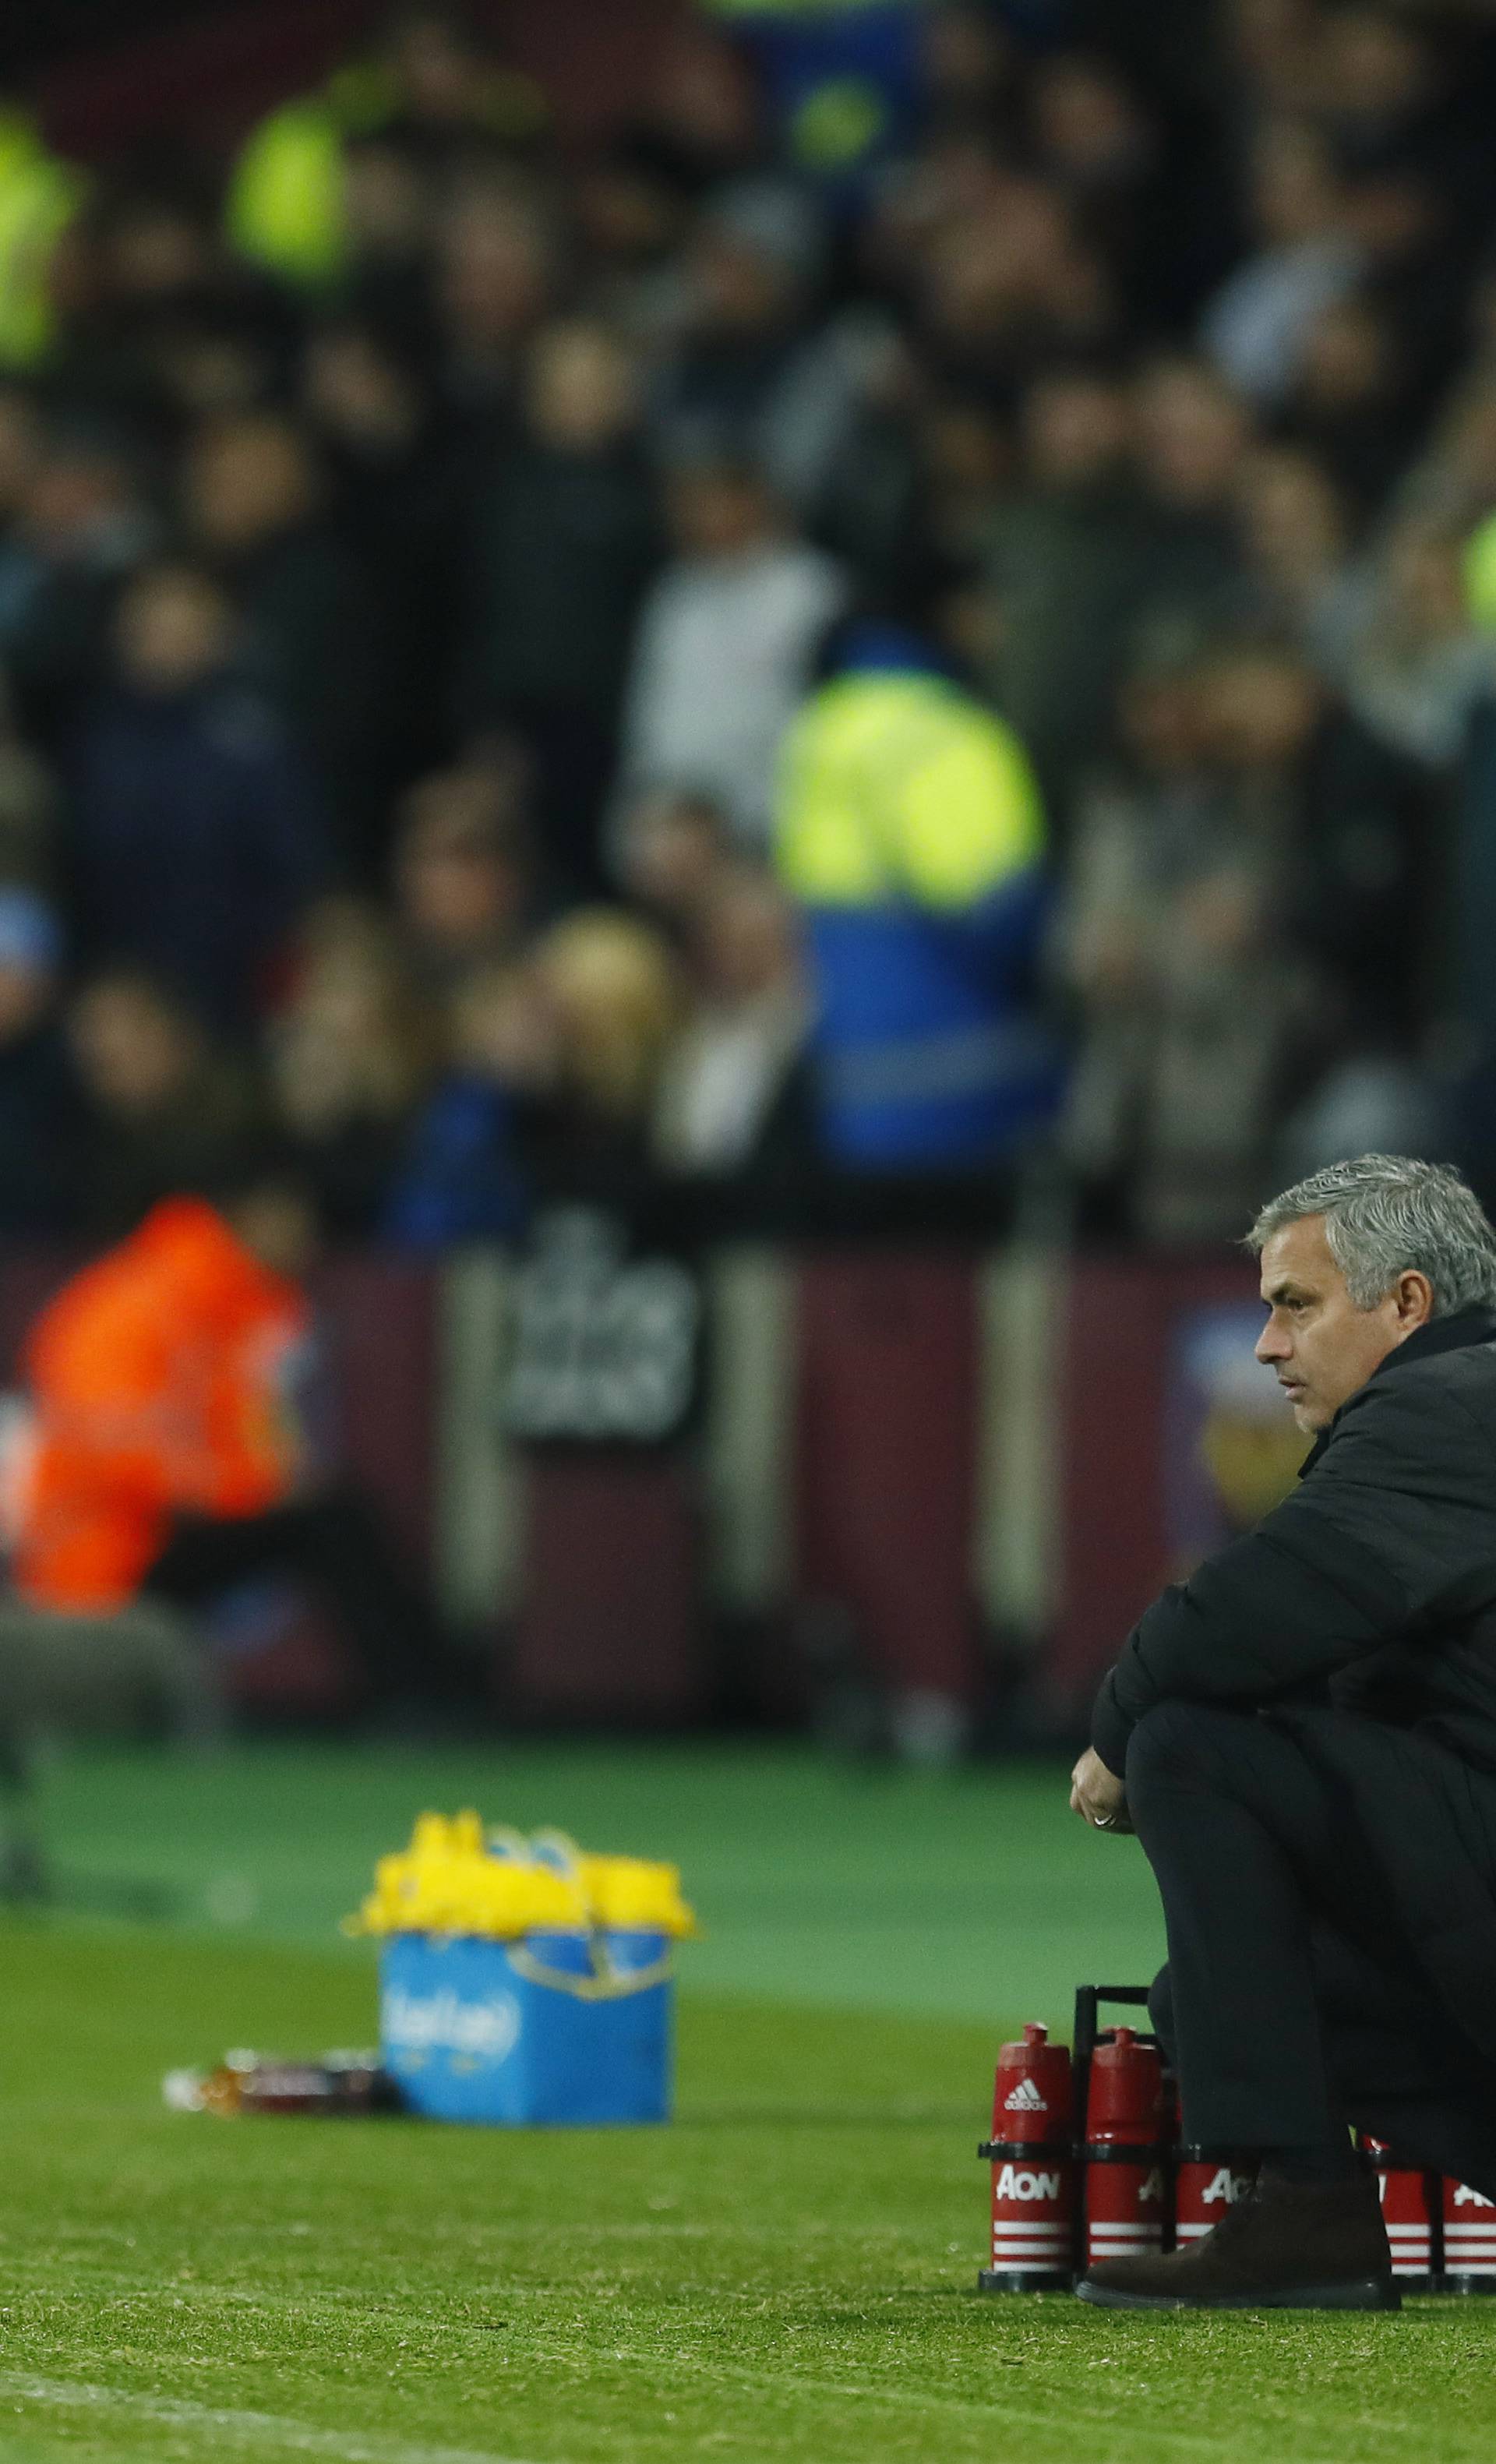 West Ham United manager Slaven Bilic in action with Manchester United manager Jose Mourinho